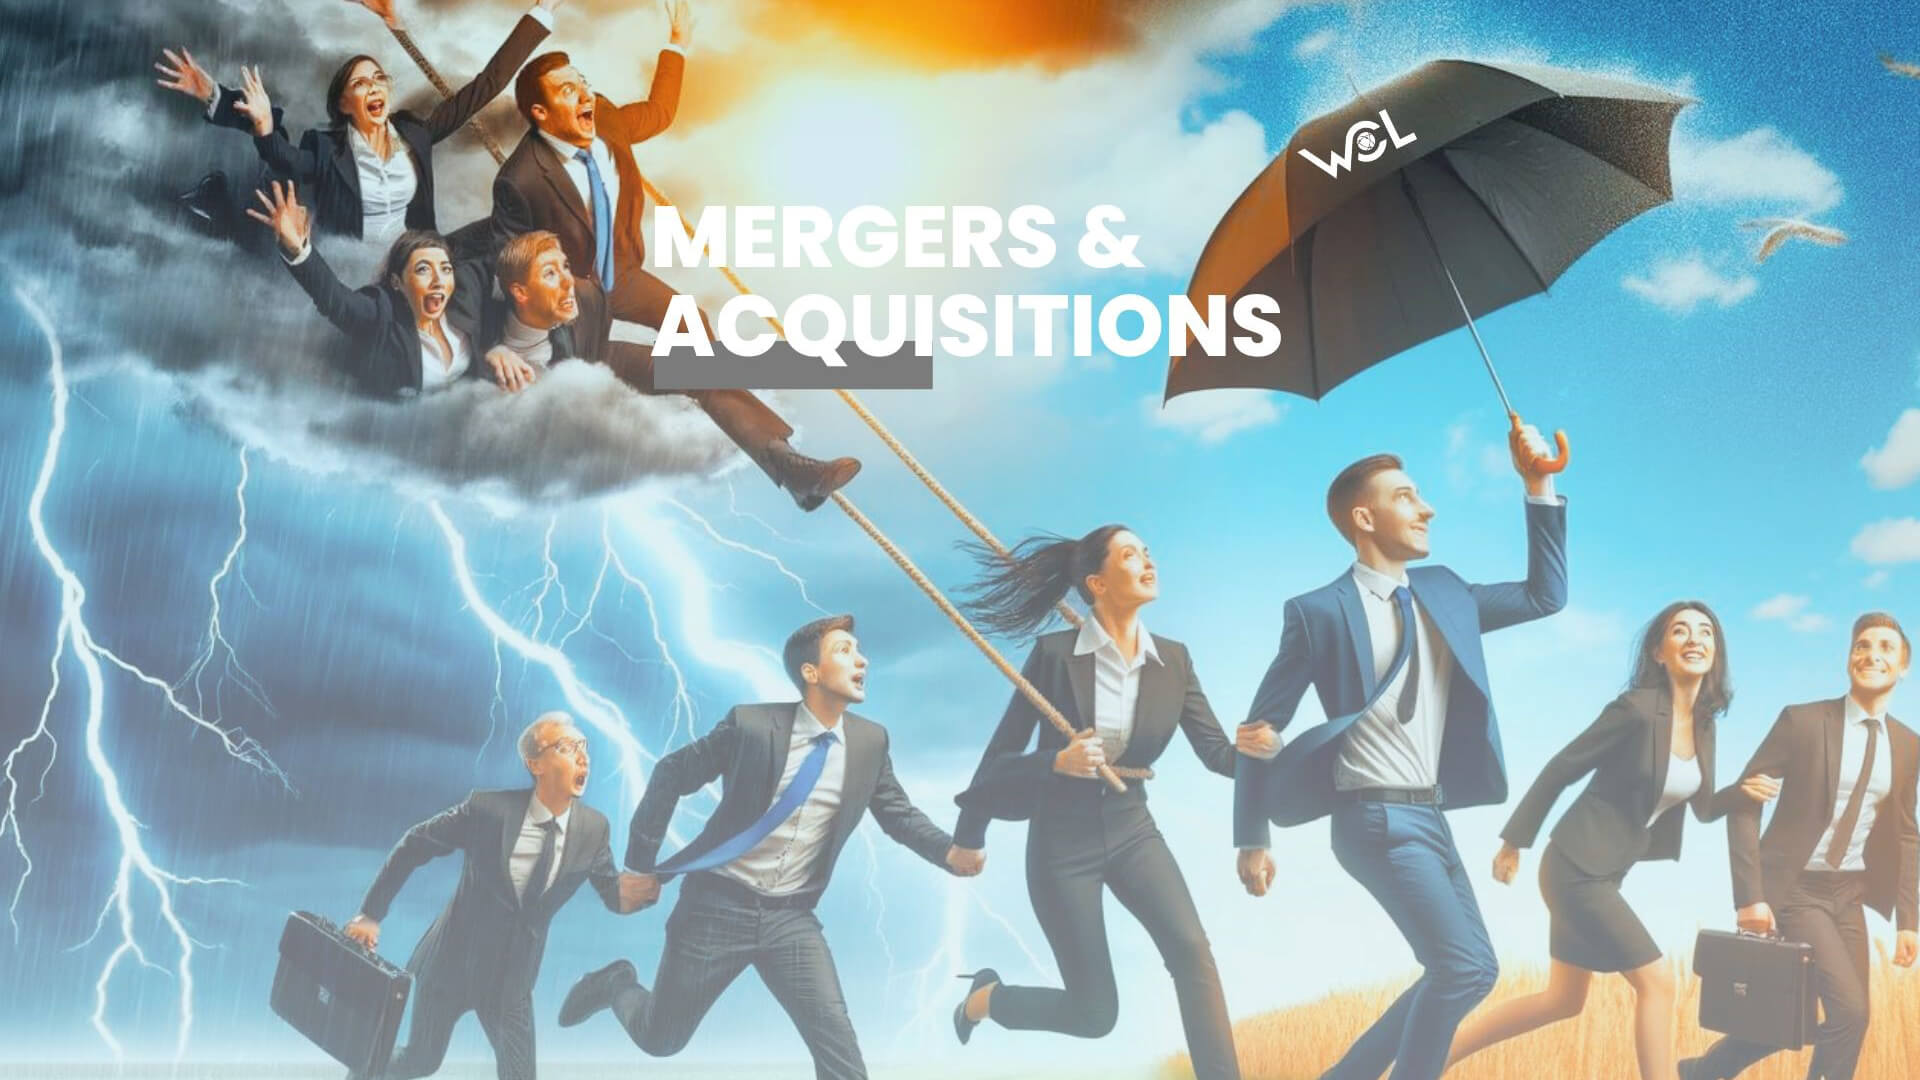 Mergers & Acquisitions (M&A) in the Logistics Industry: A Crisis or an Opportunity?